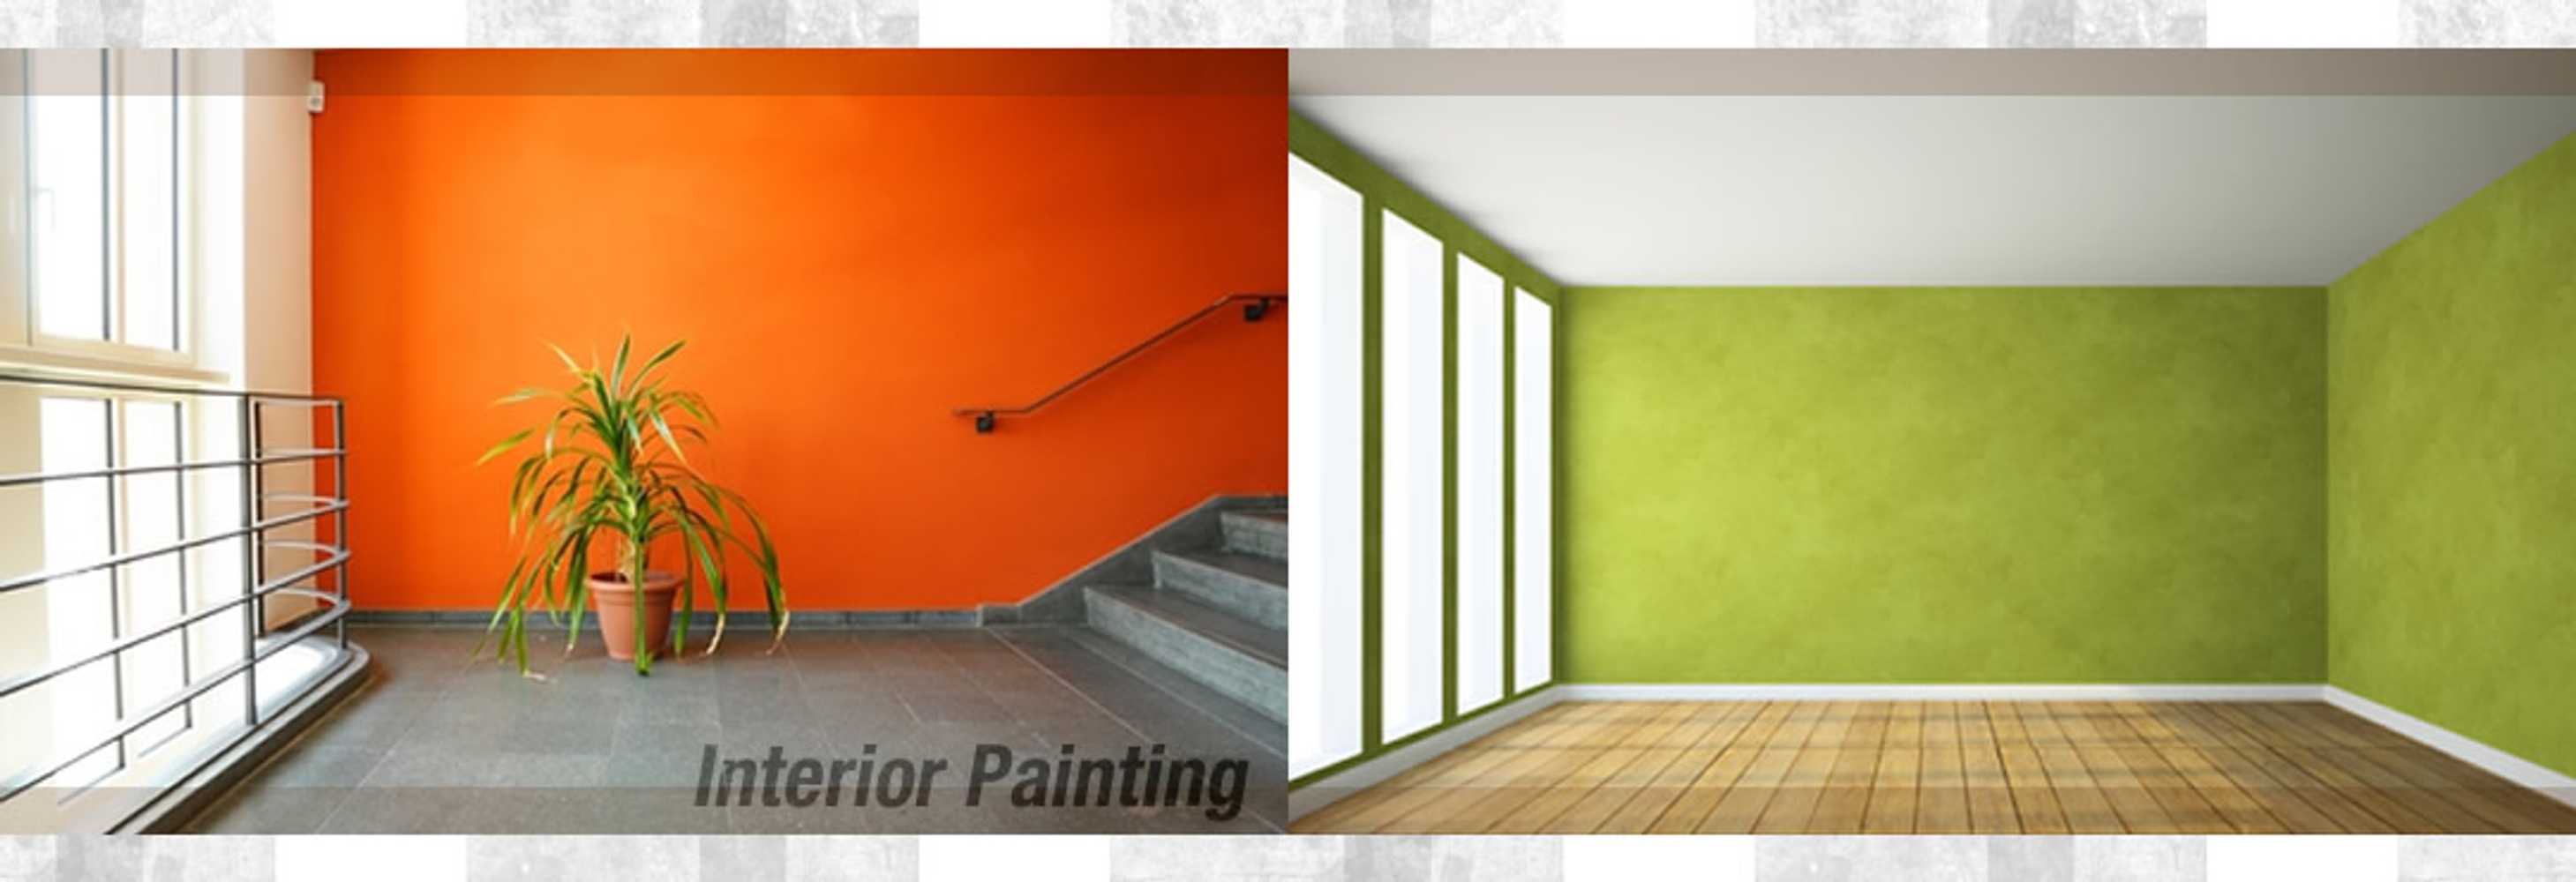 South Shore Painting Contractor